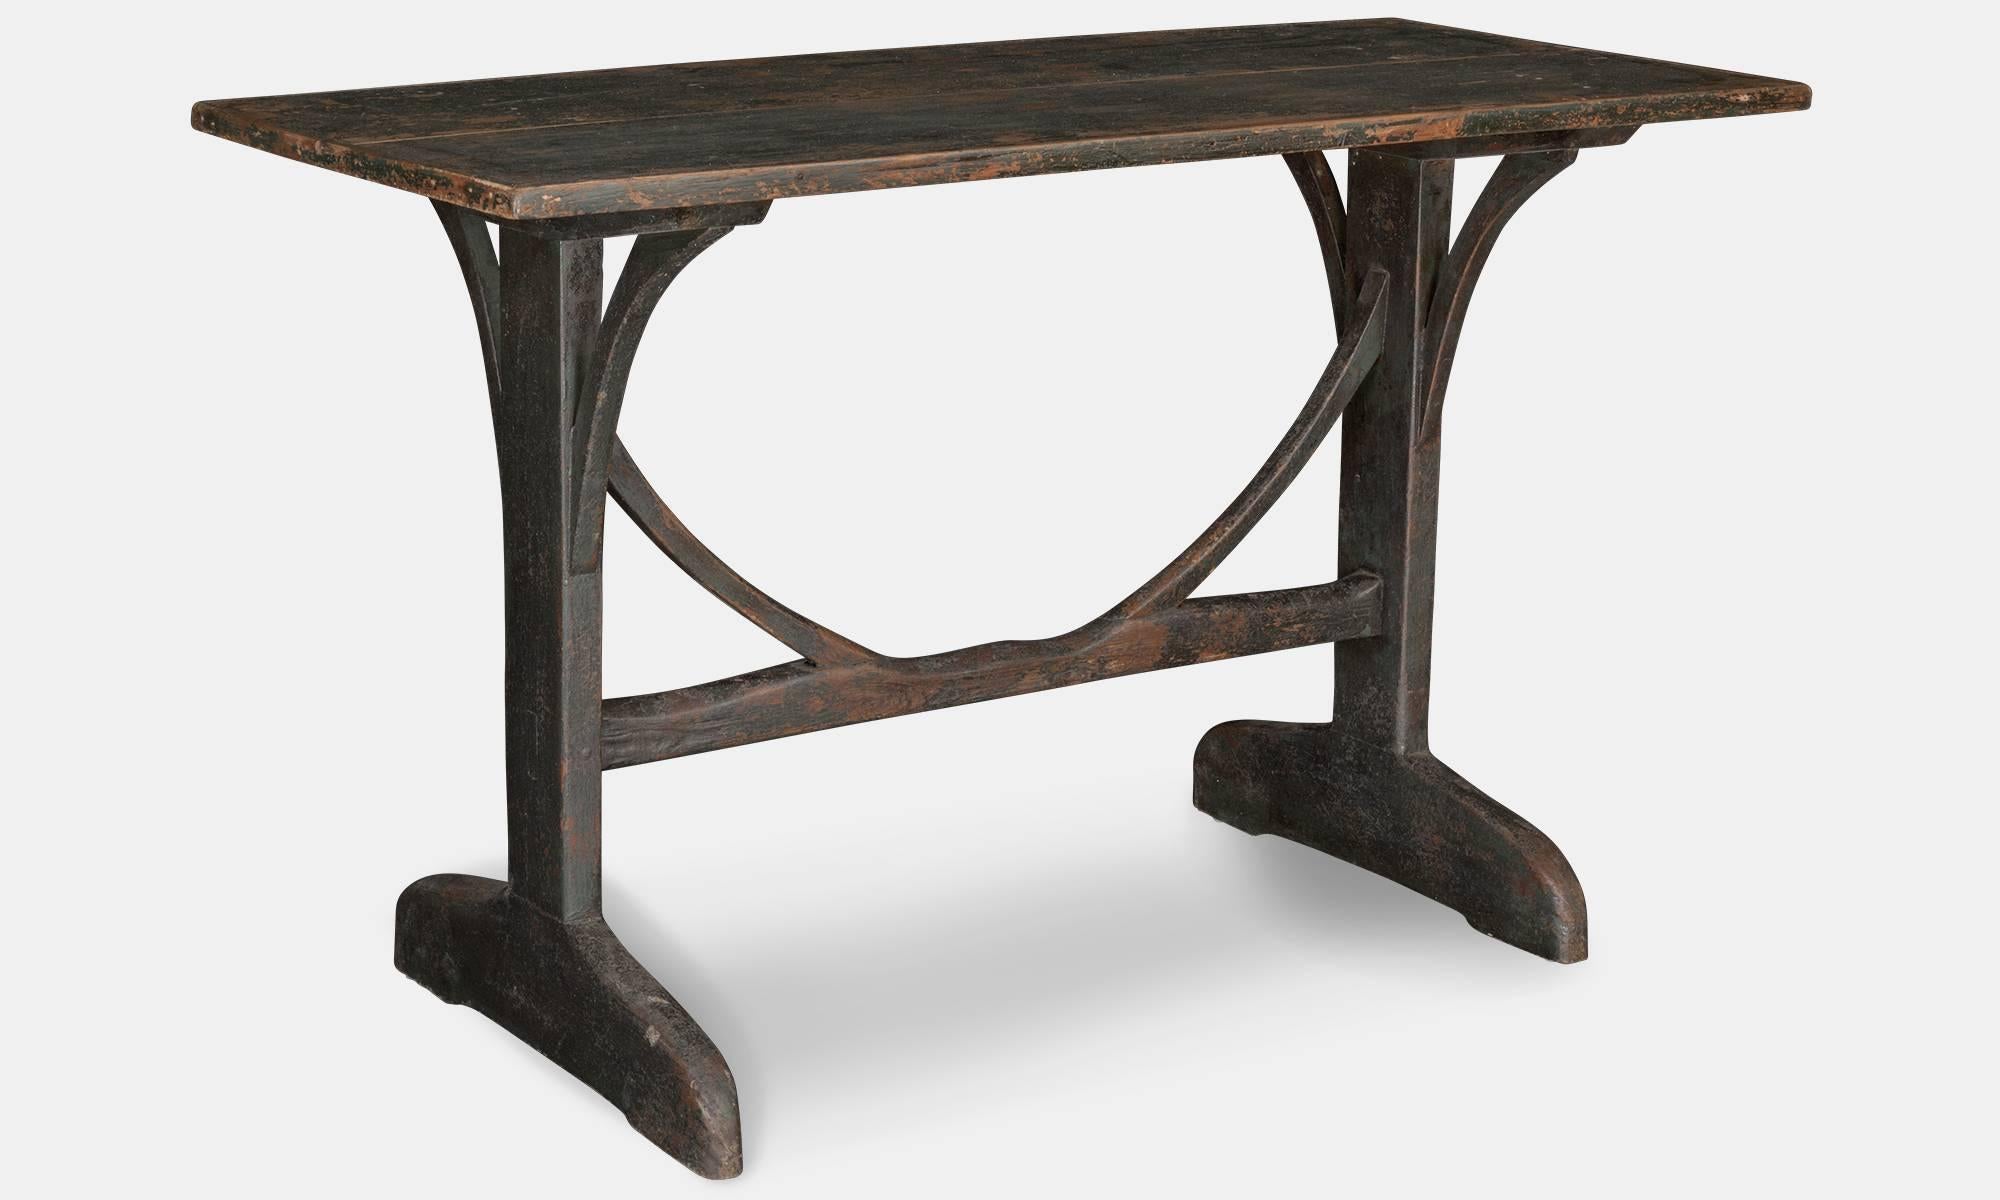 Country tavern table.

England, circa 1820.

Painted pine tavern table with original period paint.

Measures: 49" L x 22" D x 31" H.